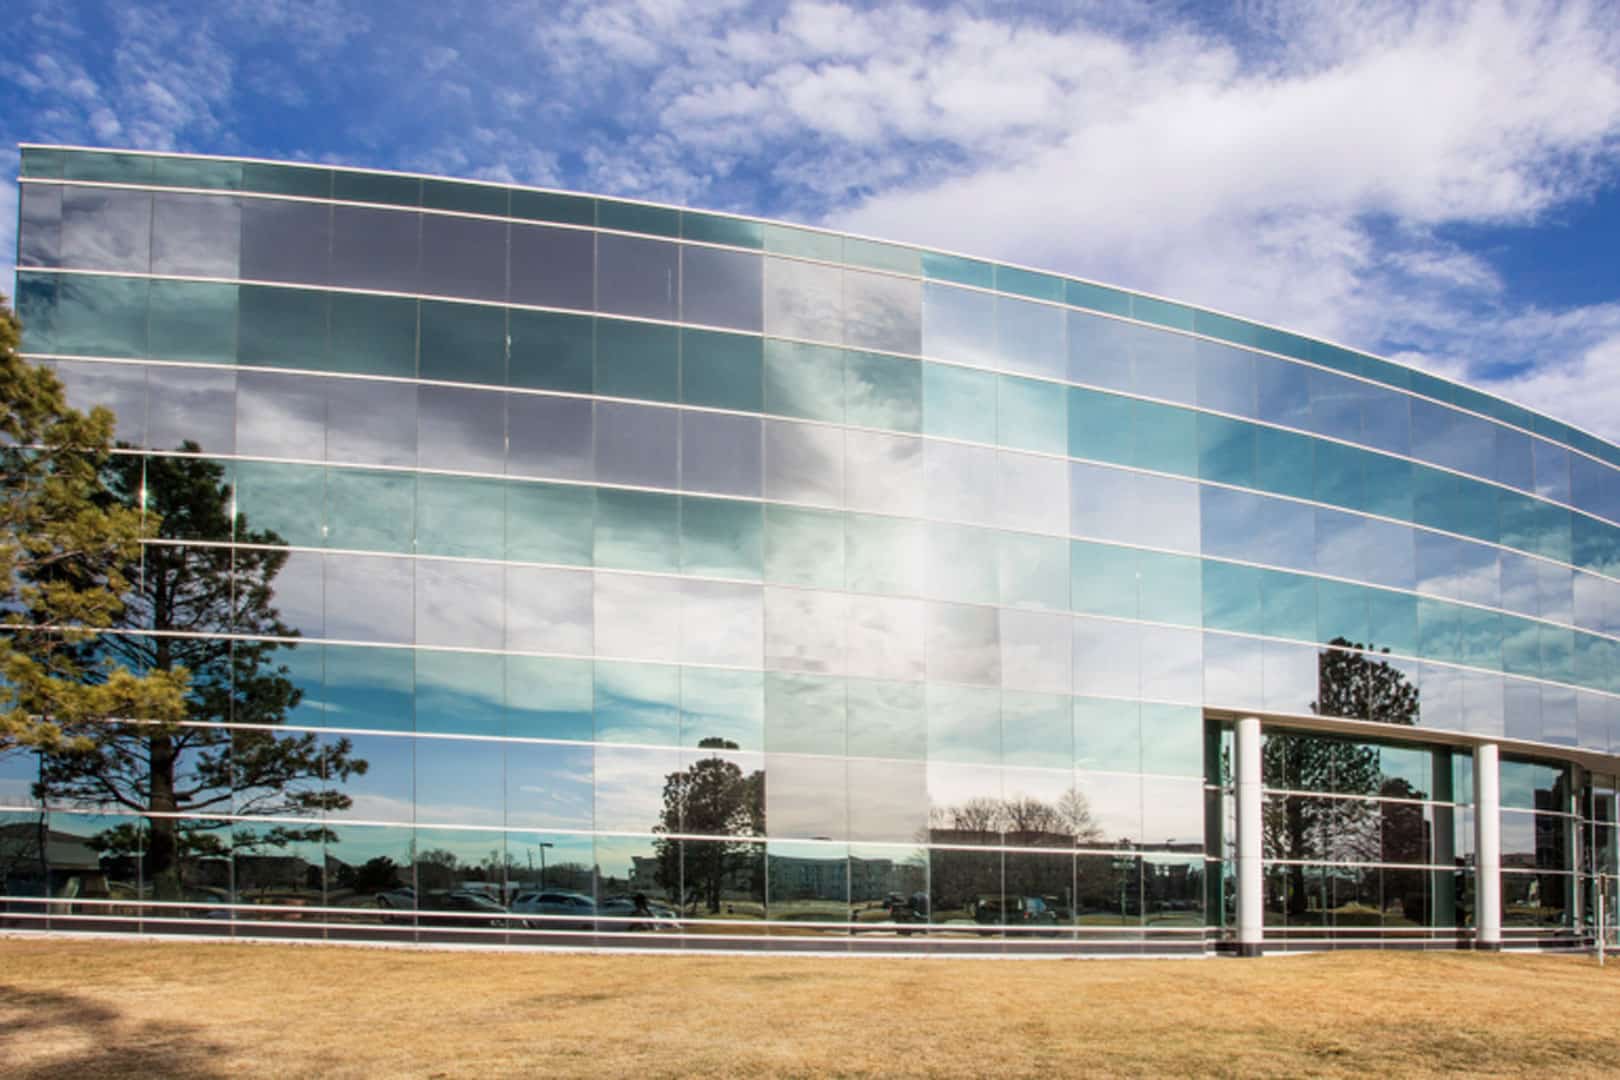 The Presidio is a four-story glass office building at 1155 Kelly Johnson Boulevard in Colorado Springs, Colorado